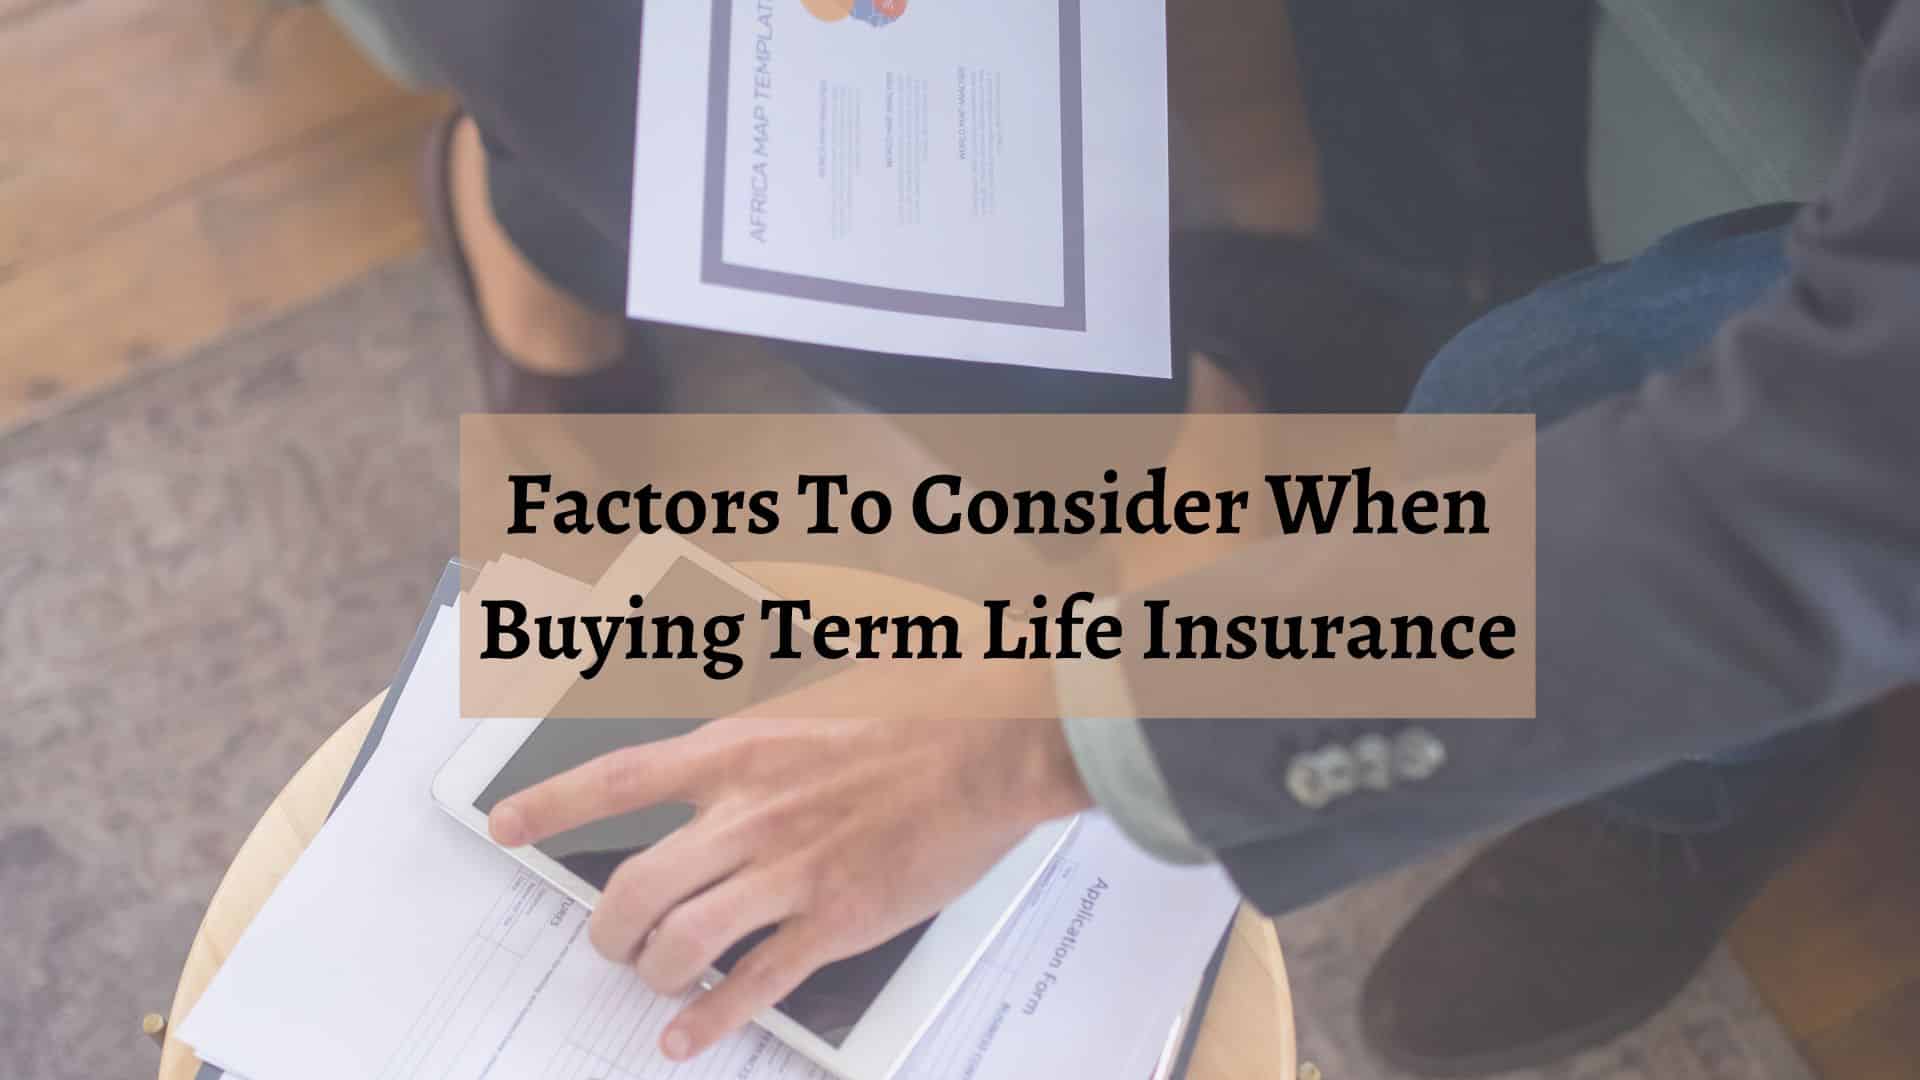 Things to Consider When Buying Term Life Insurance